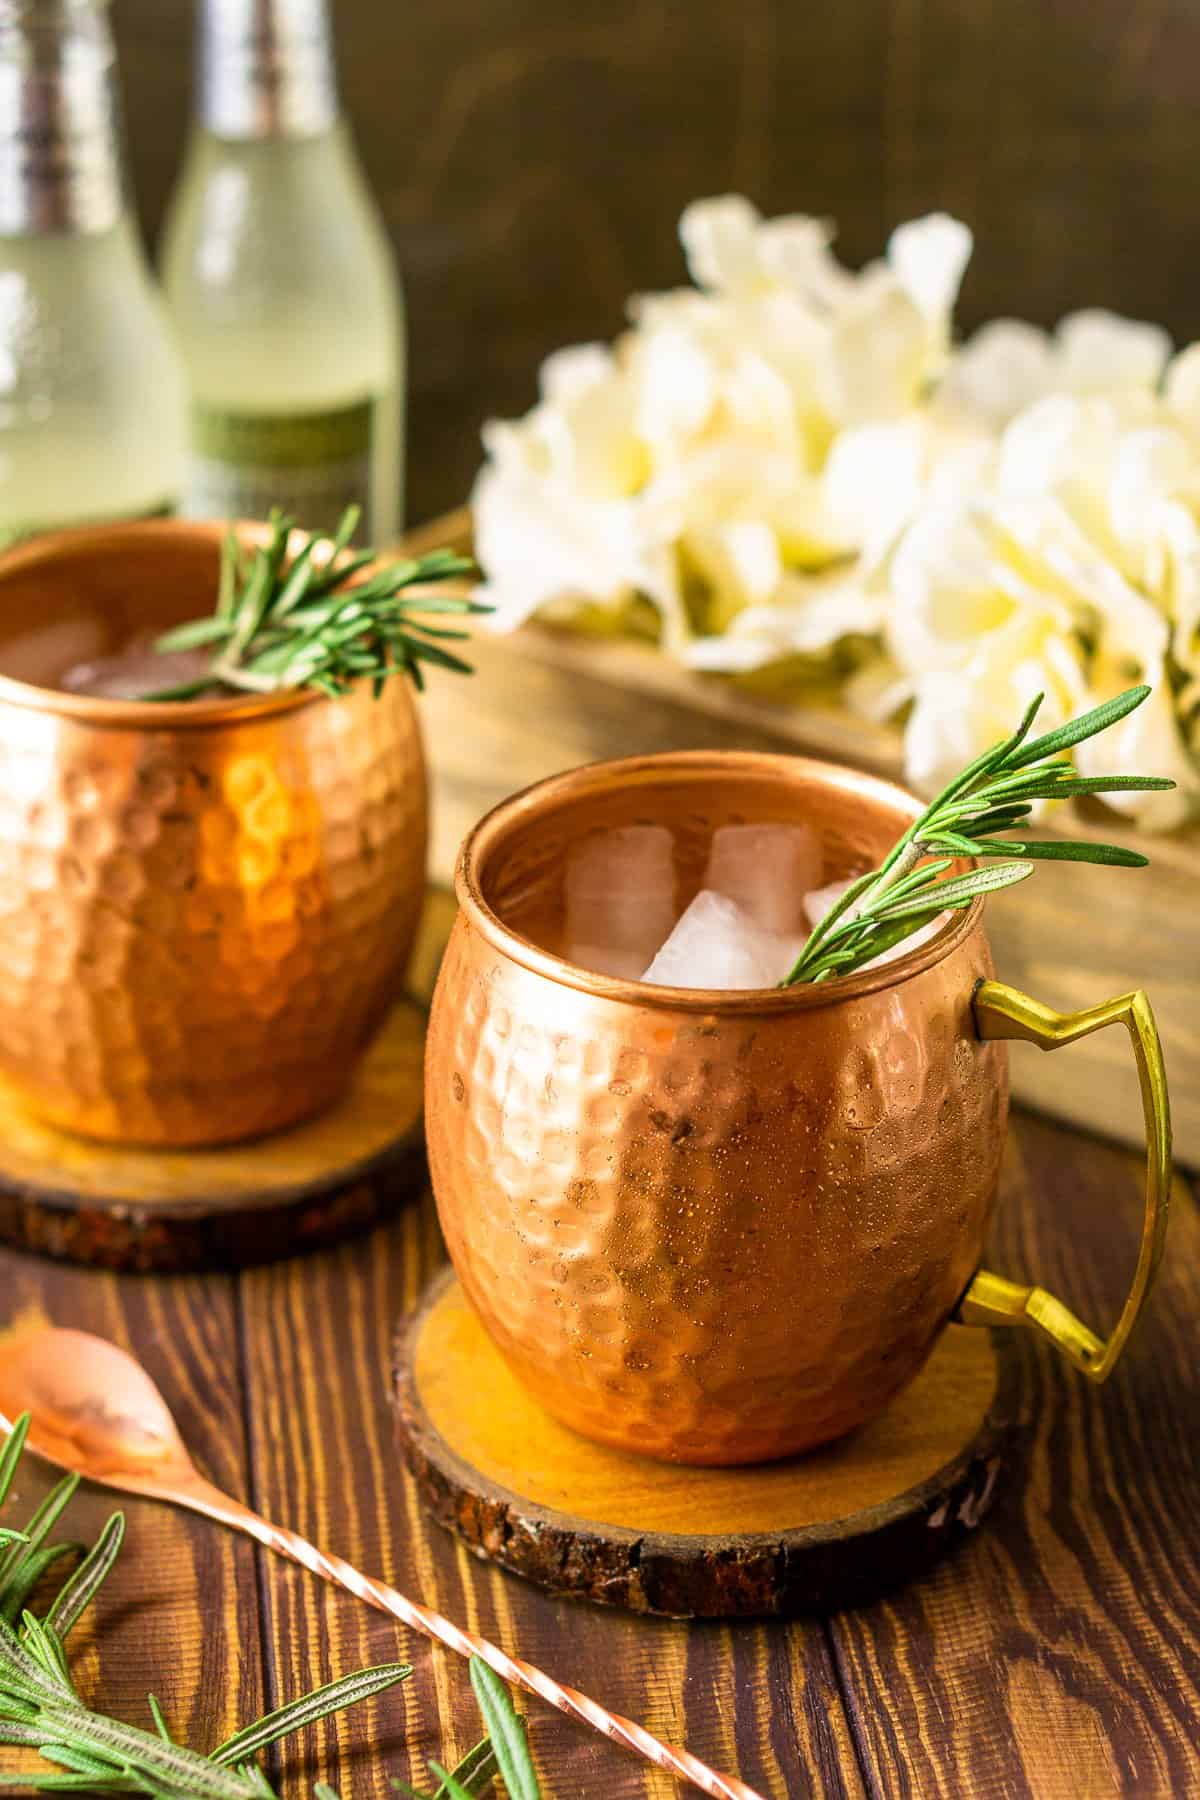 A side view of the bourbon mule with white flowers behind it.